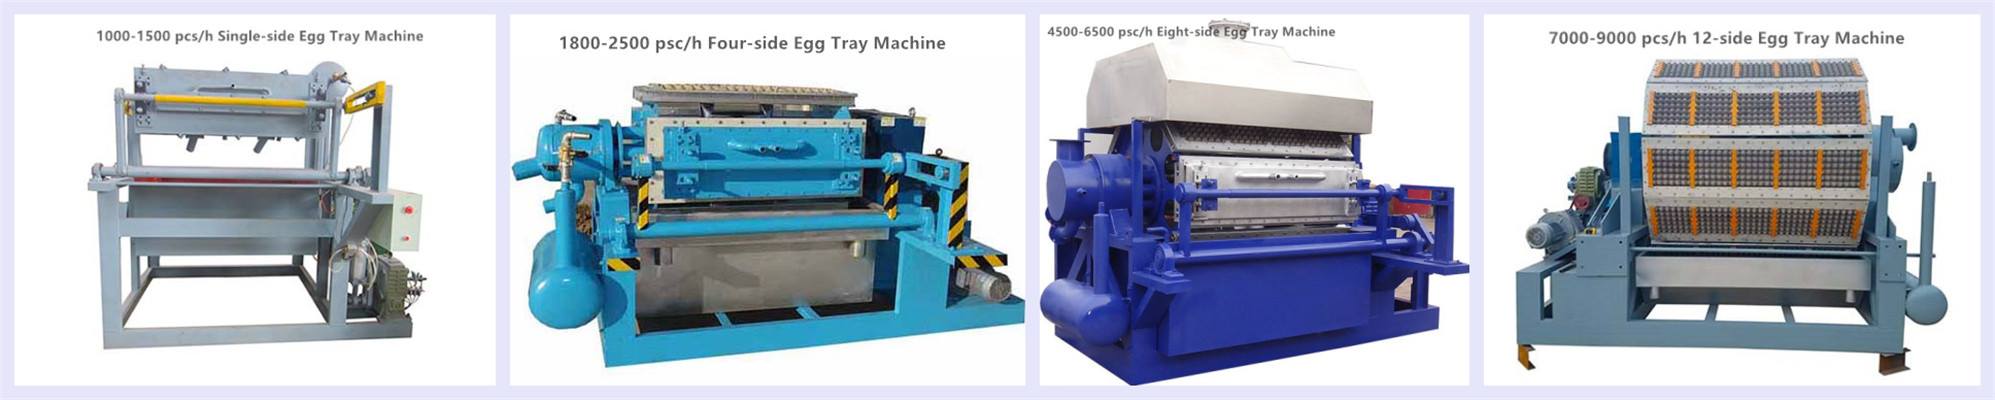 Egg Tray Making Machine for Sale